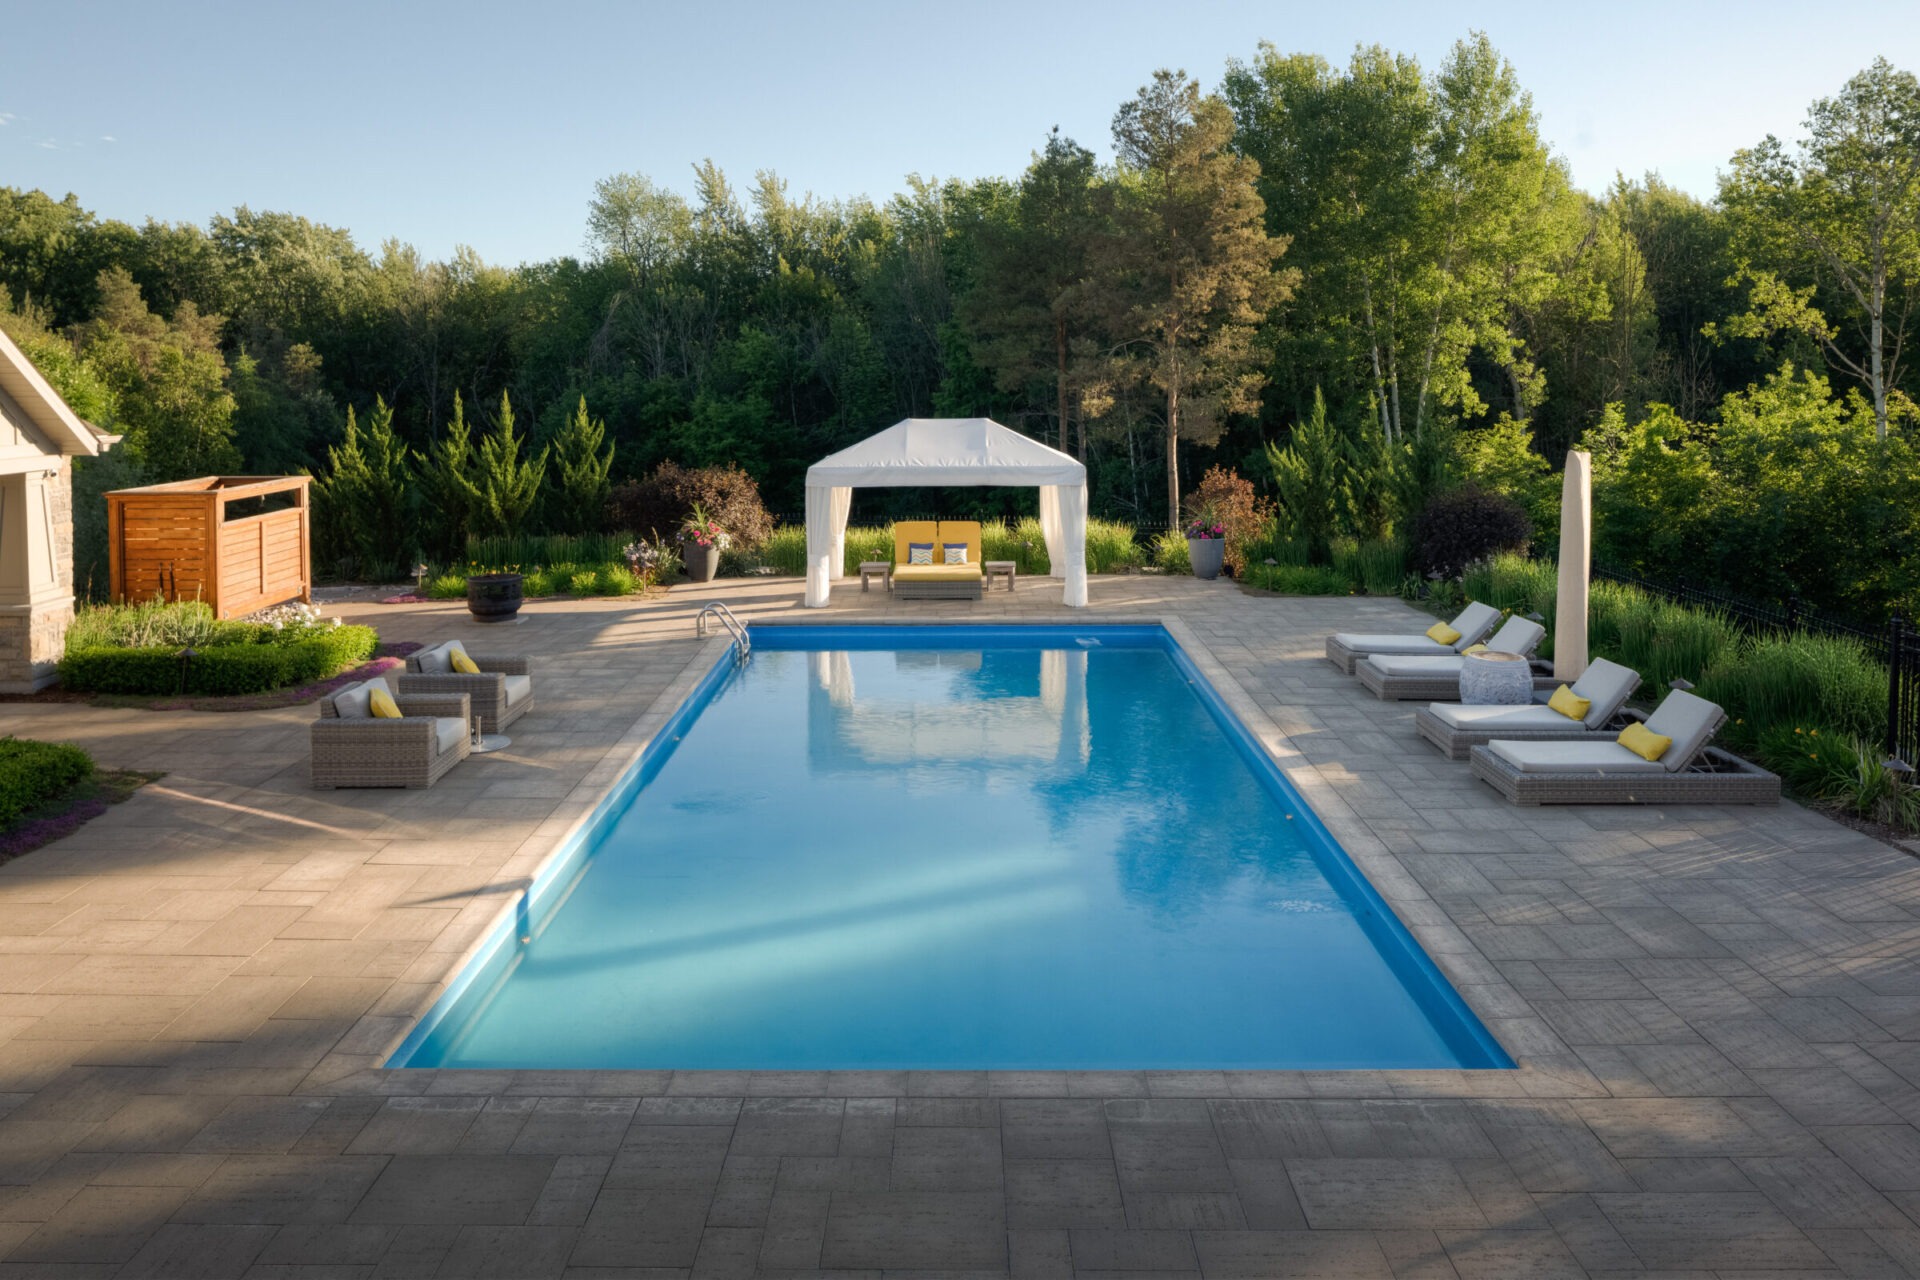 This image shows an outdoor residential swimming pool with chaise lounges and a gazebo, surrounded by trees, a garden, and a clear sky above.